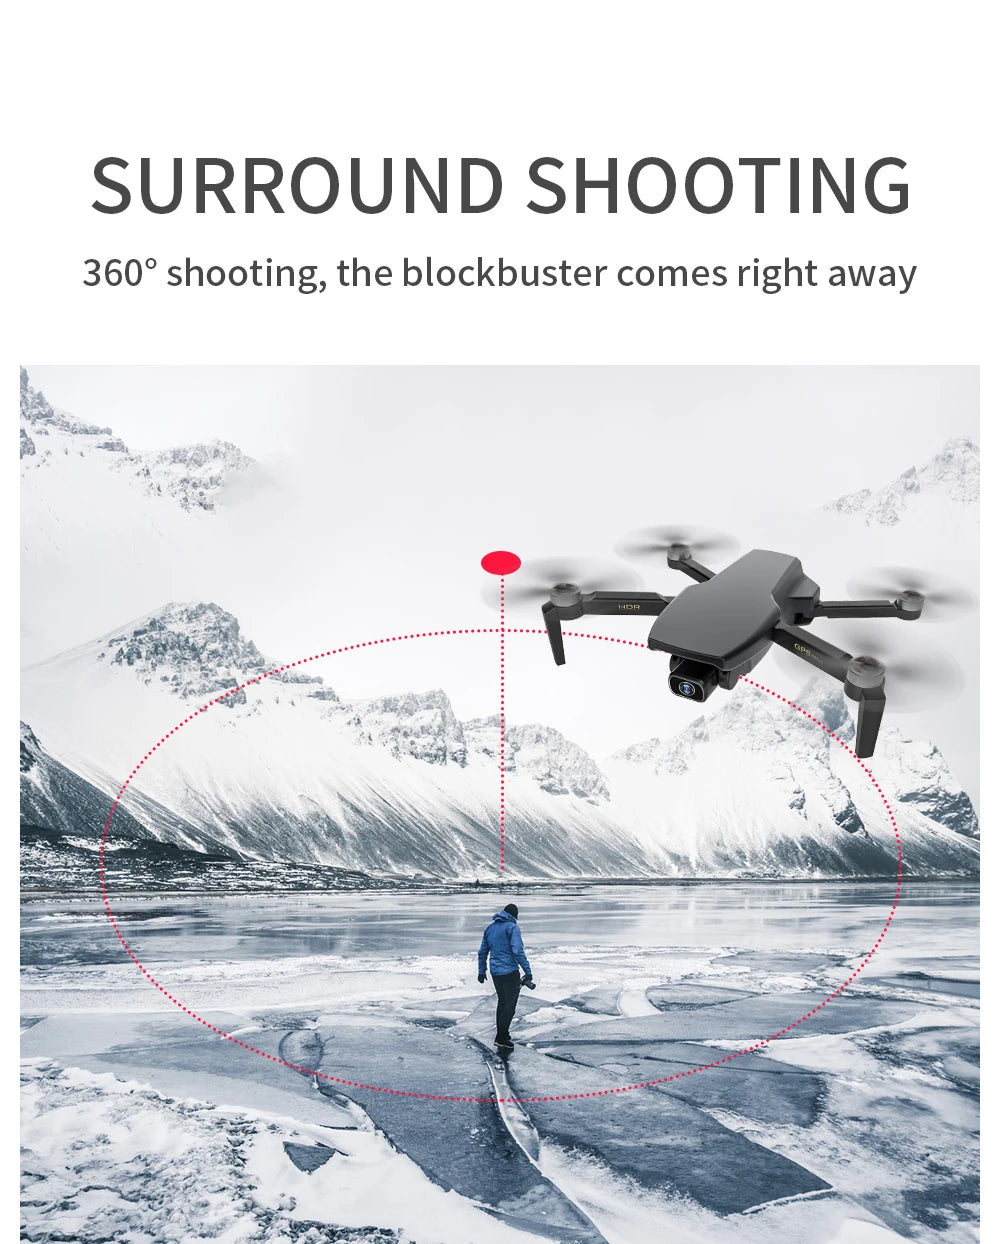 G108 Pro MAx Drone, SURROUND SHOOTING 3609 shooting; the blockbuster comes right away 1